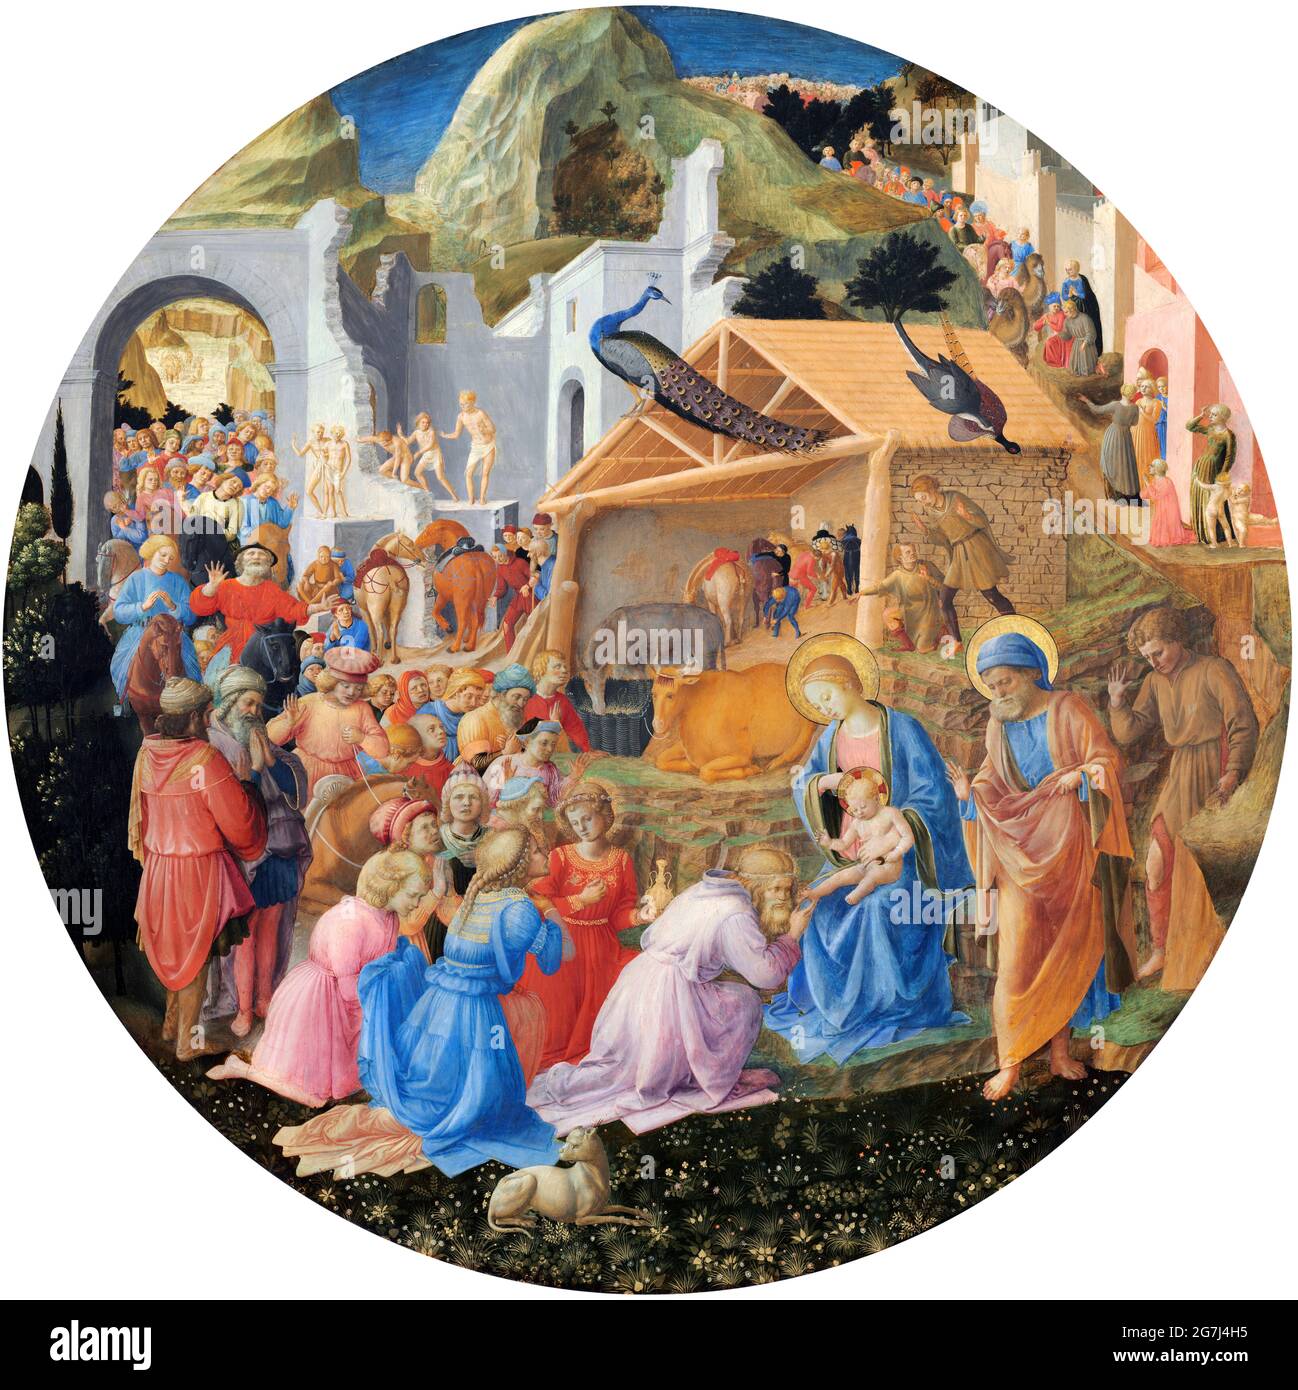 Fra Angelico (c.1395-1455), The Adoration of the Magi, tempera on panel, c. 1440-1460 Stock Photo